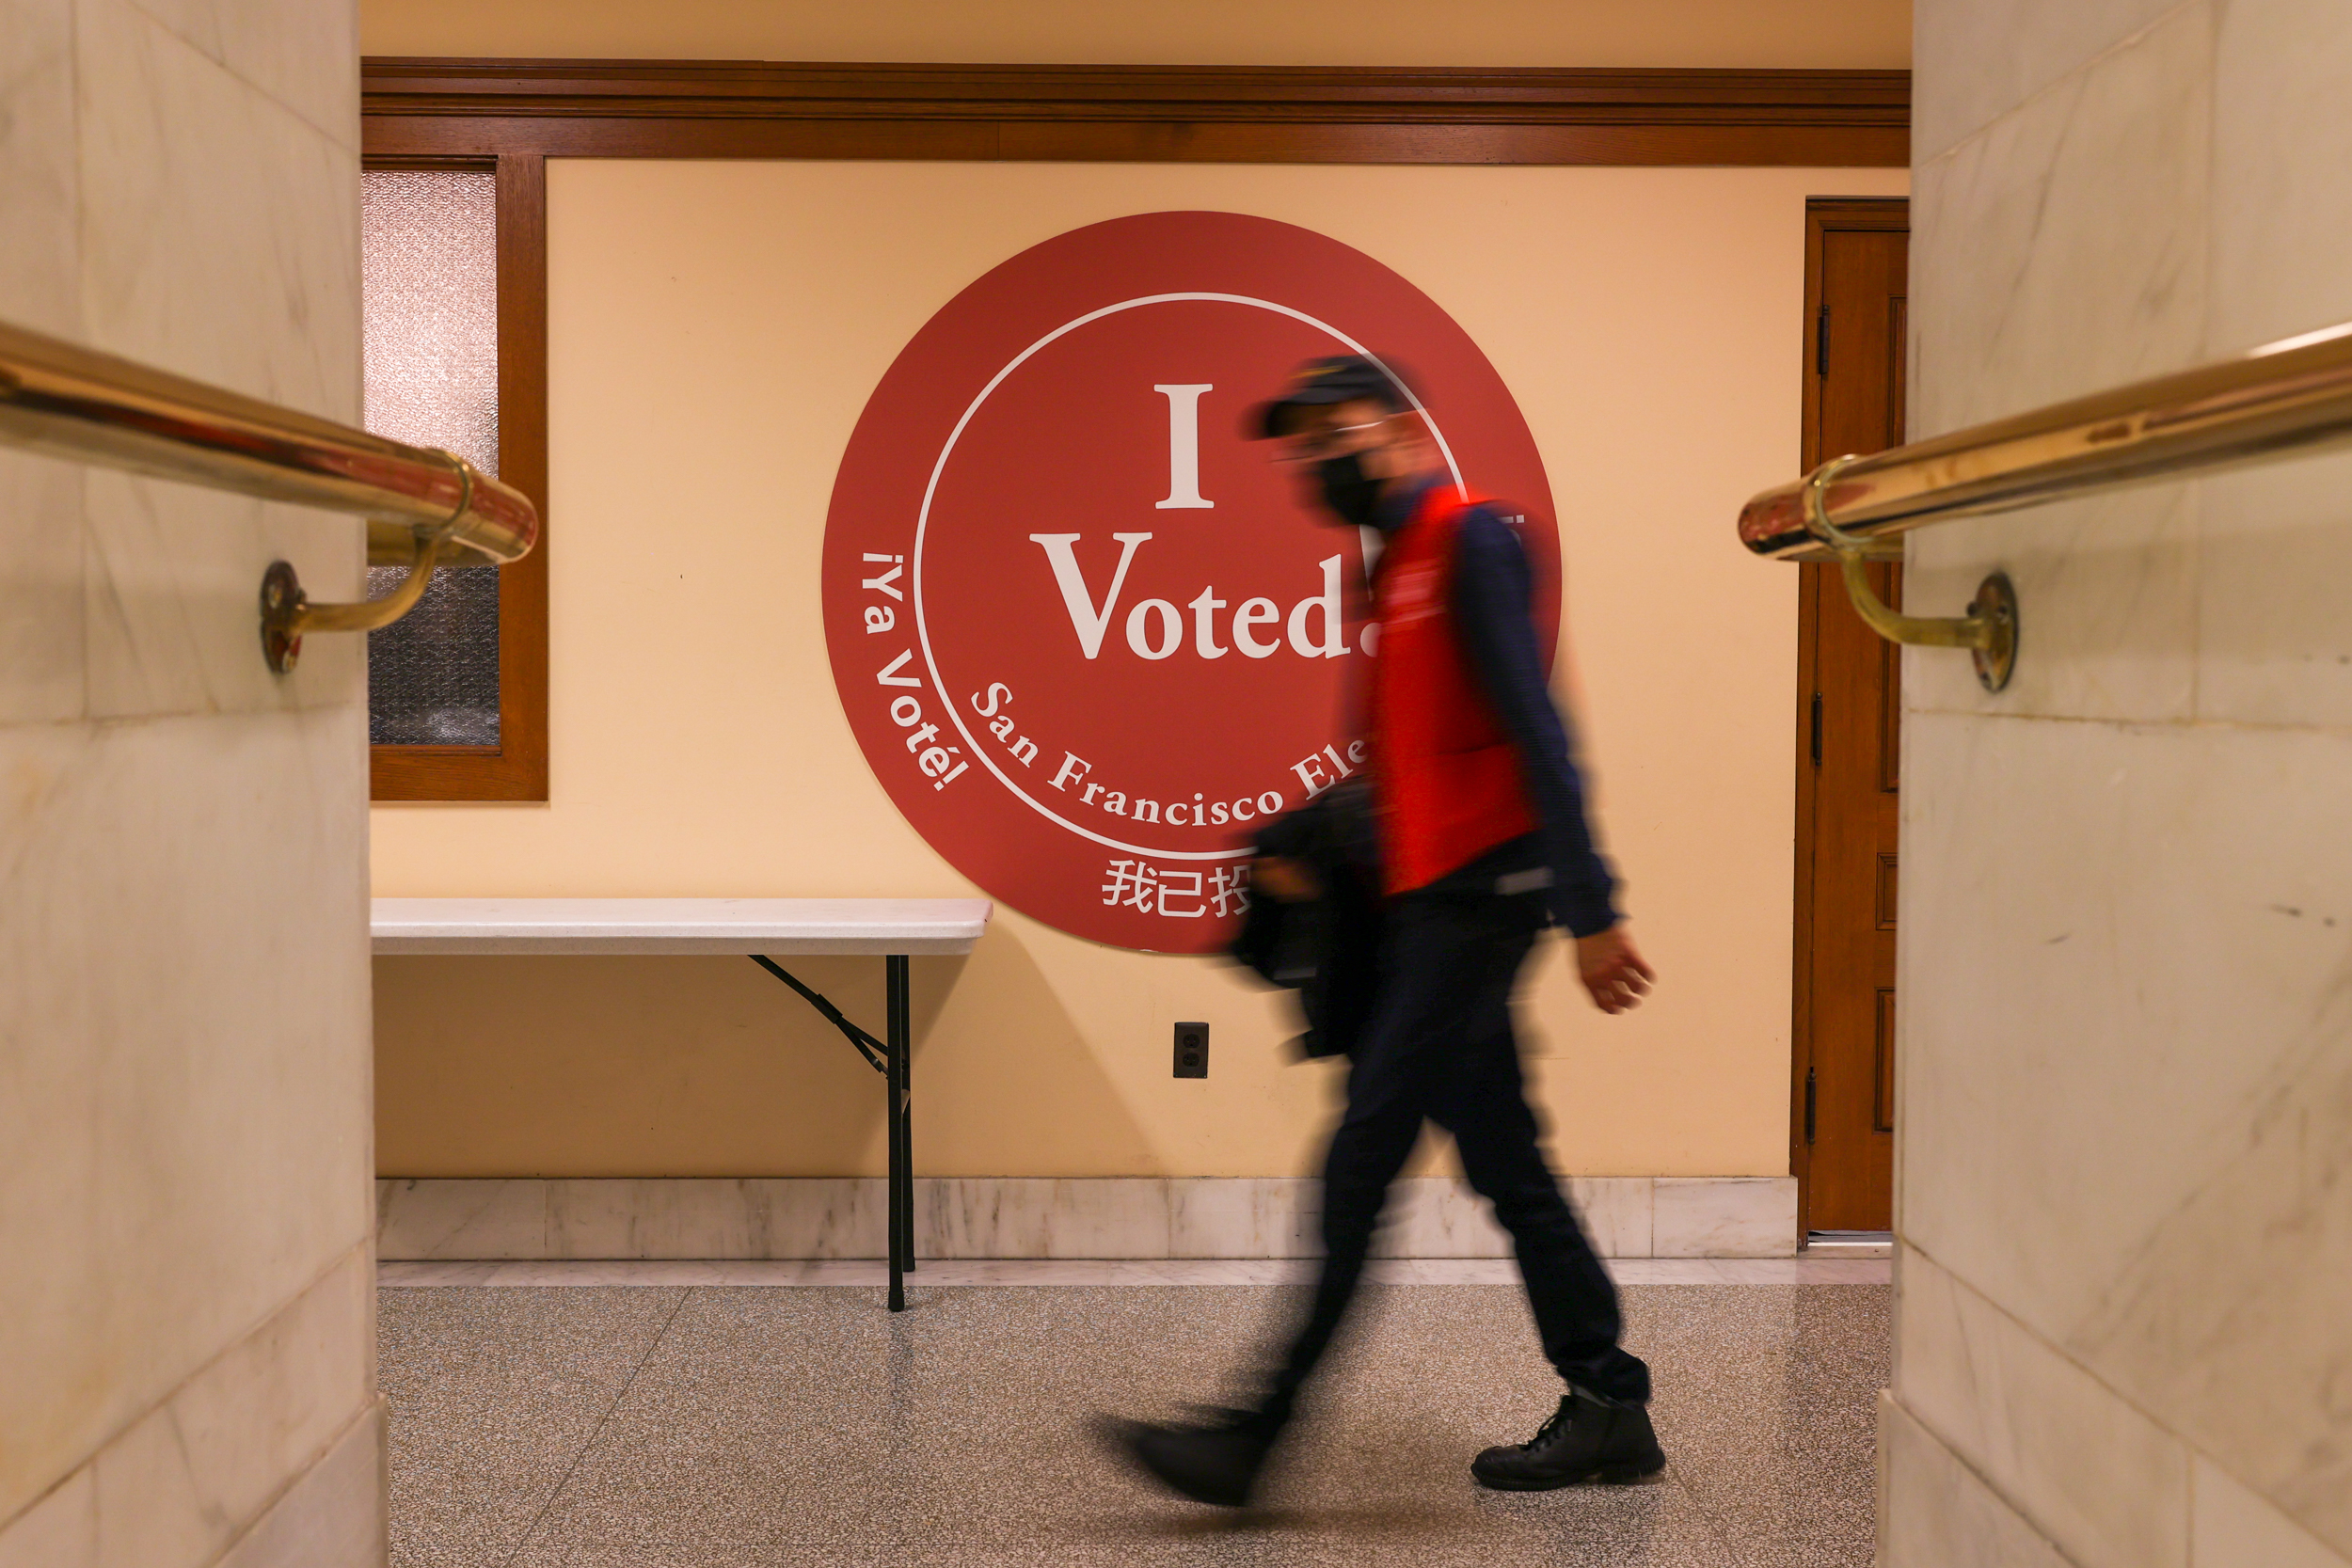 A blurred person walks by a large "I Voted" sticker sign with text in multiple languages, indicating a polling station.